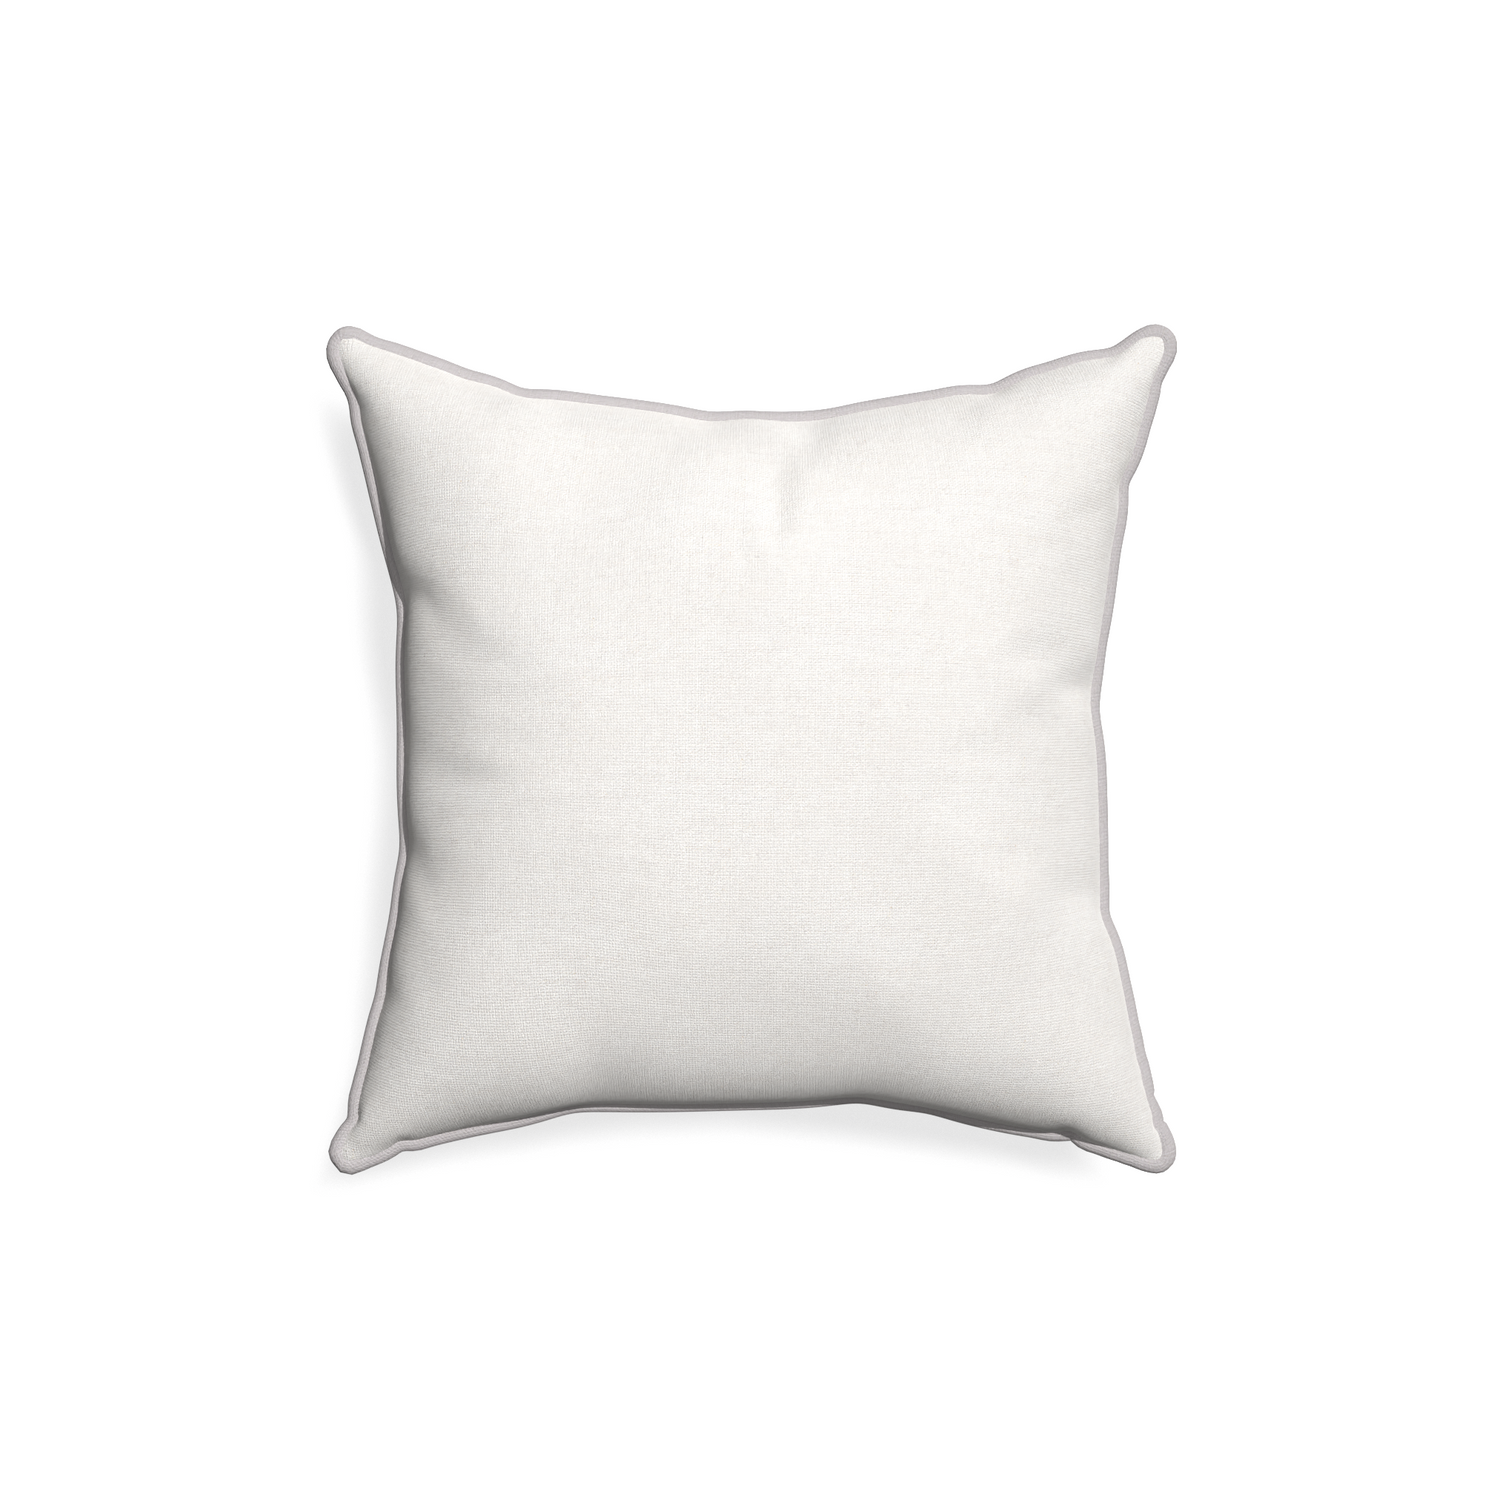 18-square flour custom pillow with pebble piping on white background